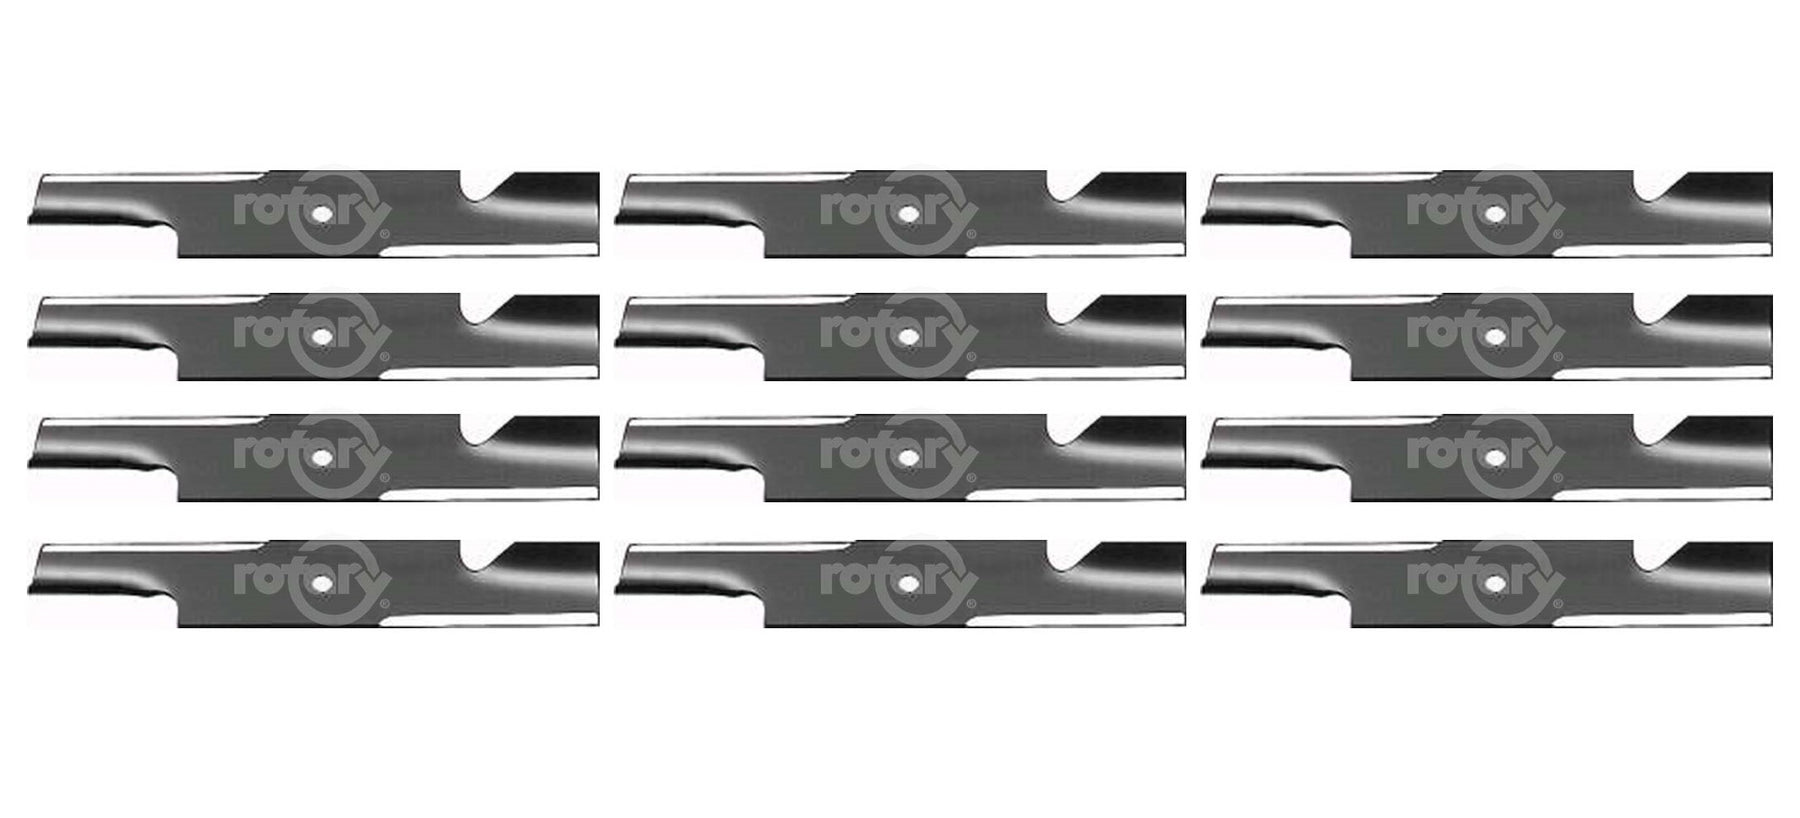 12 Pack Lawn Mower Blades Fits Windsor 50-2300